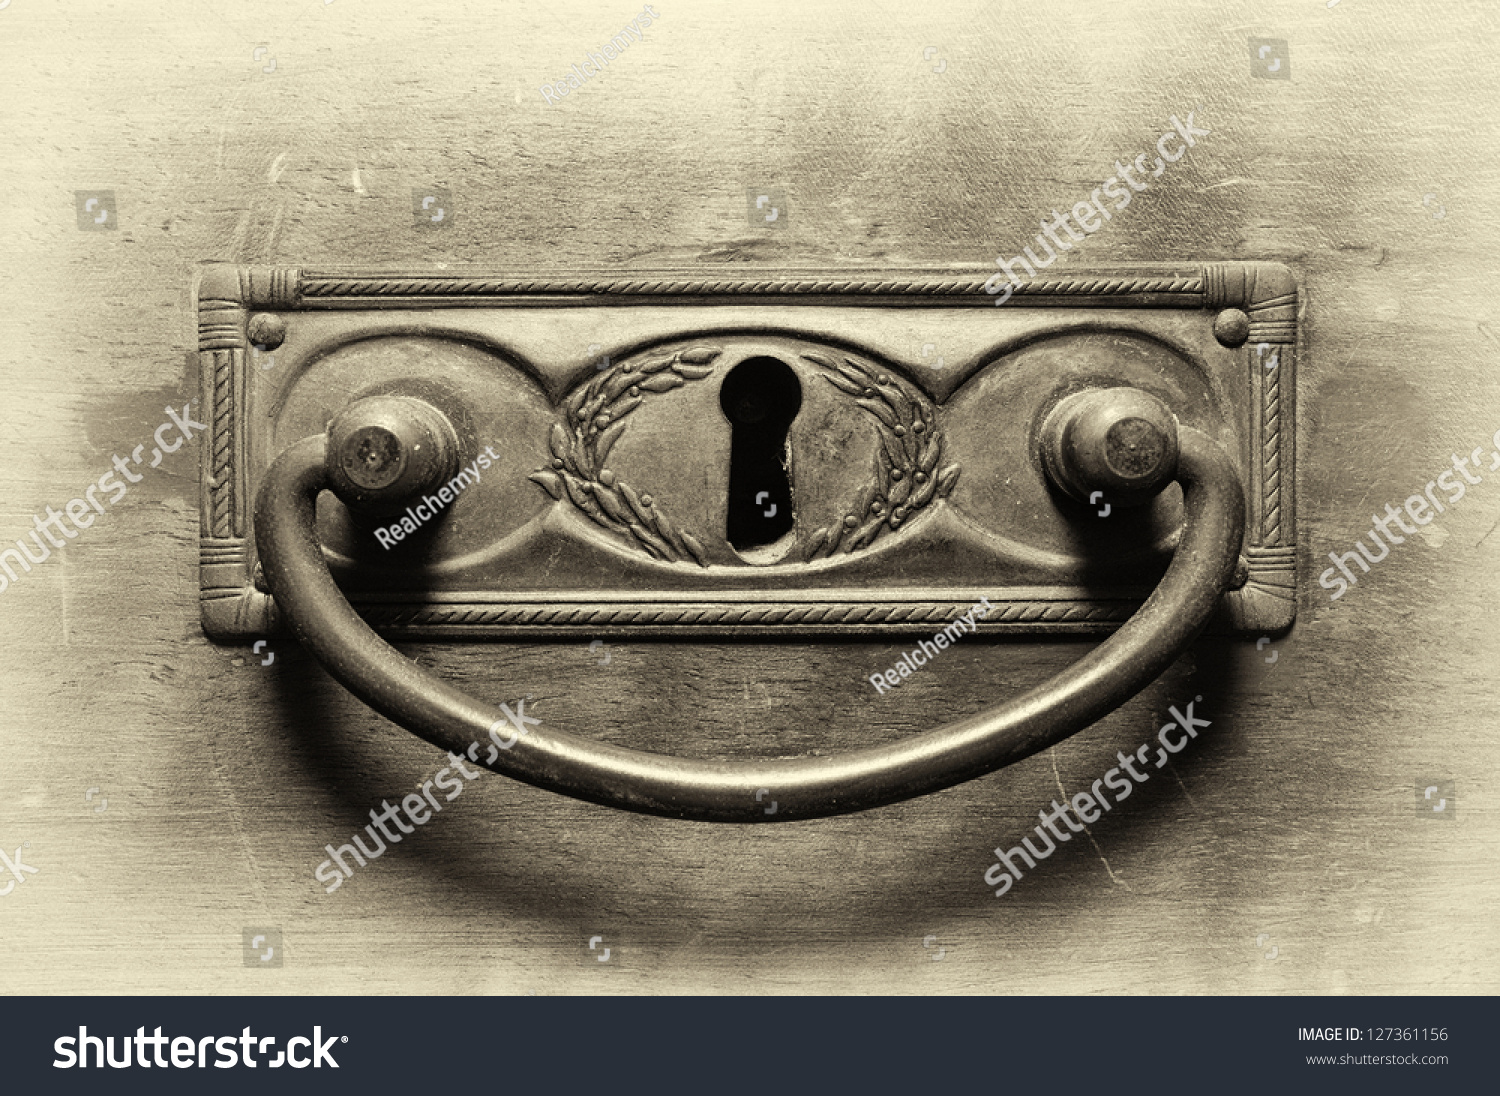 Old drawer handle in sepia tone #127361156